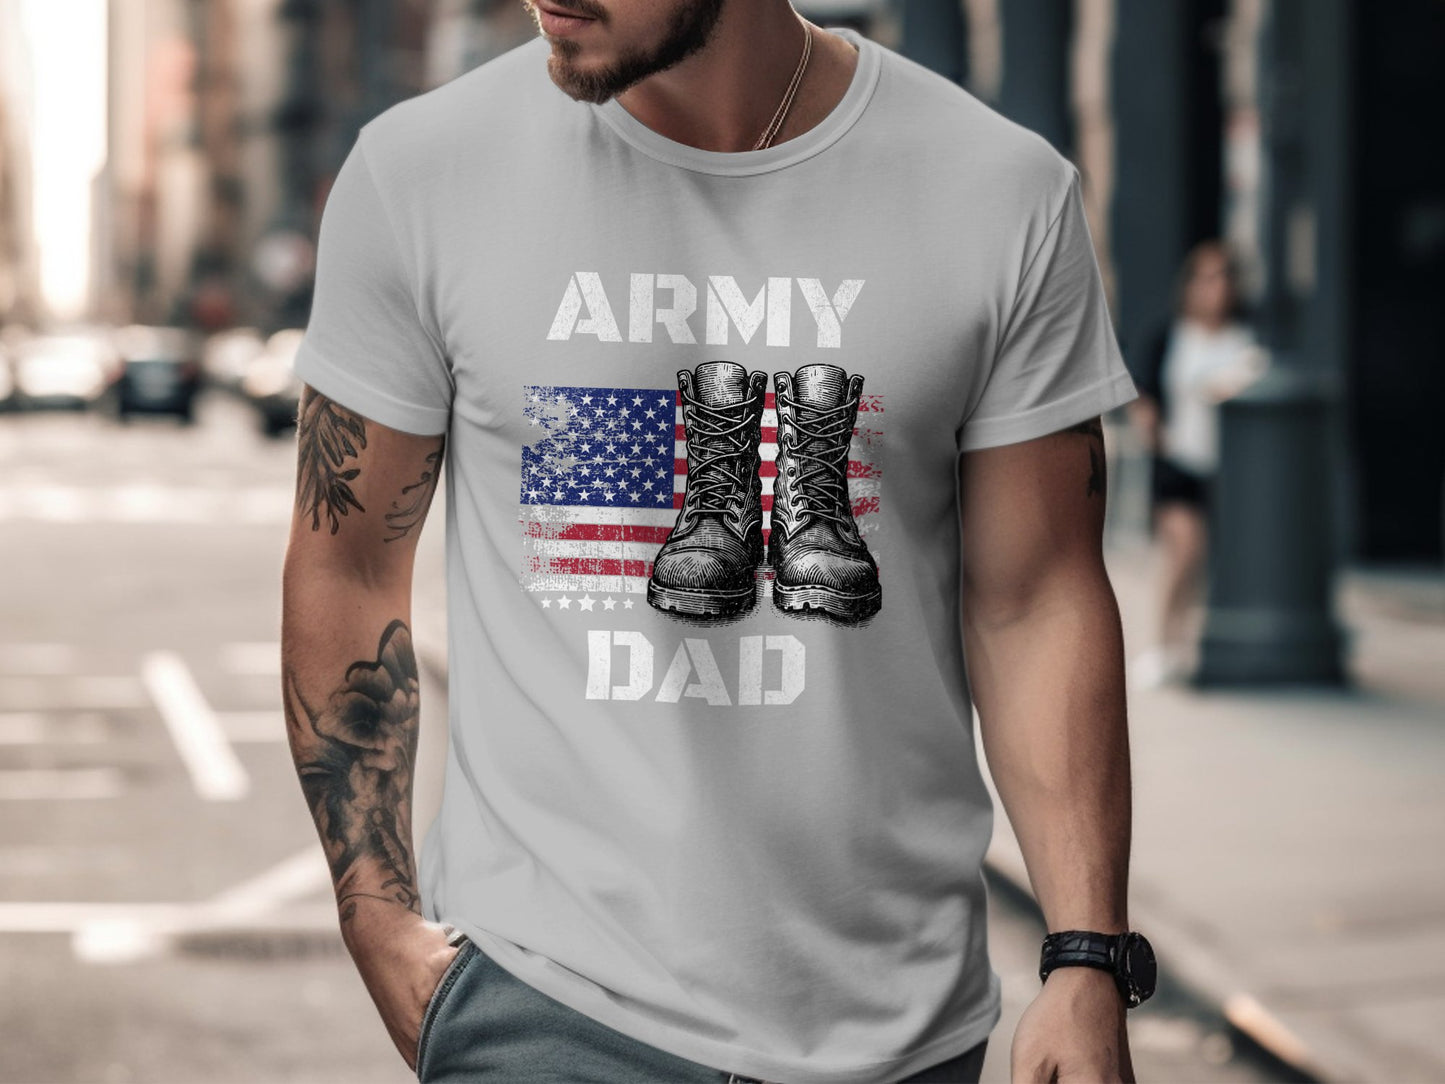 Army Dad Vintage American Flag and Boots T-Shirt, Patriotic Military Shirt - Mardonyx T-Shirt XS / Athletic Heather